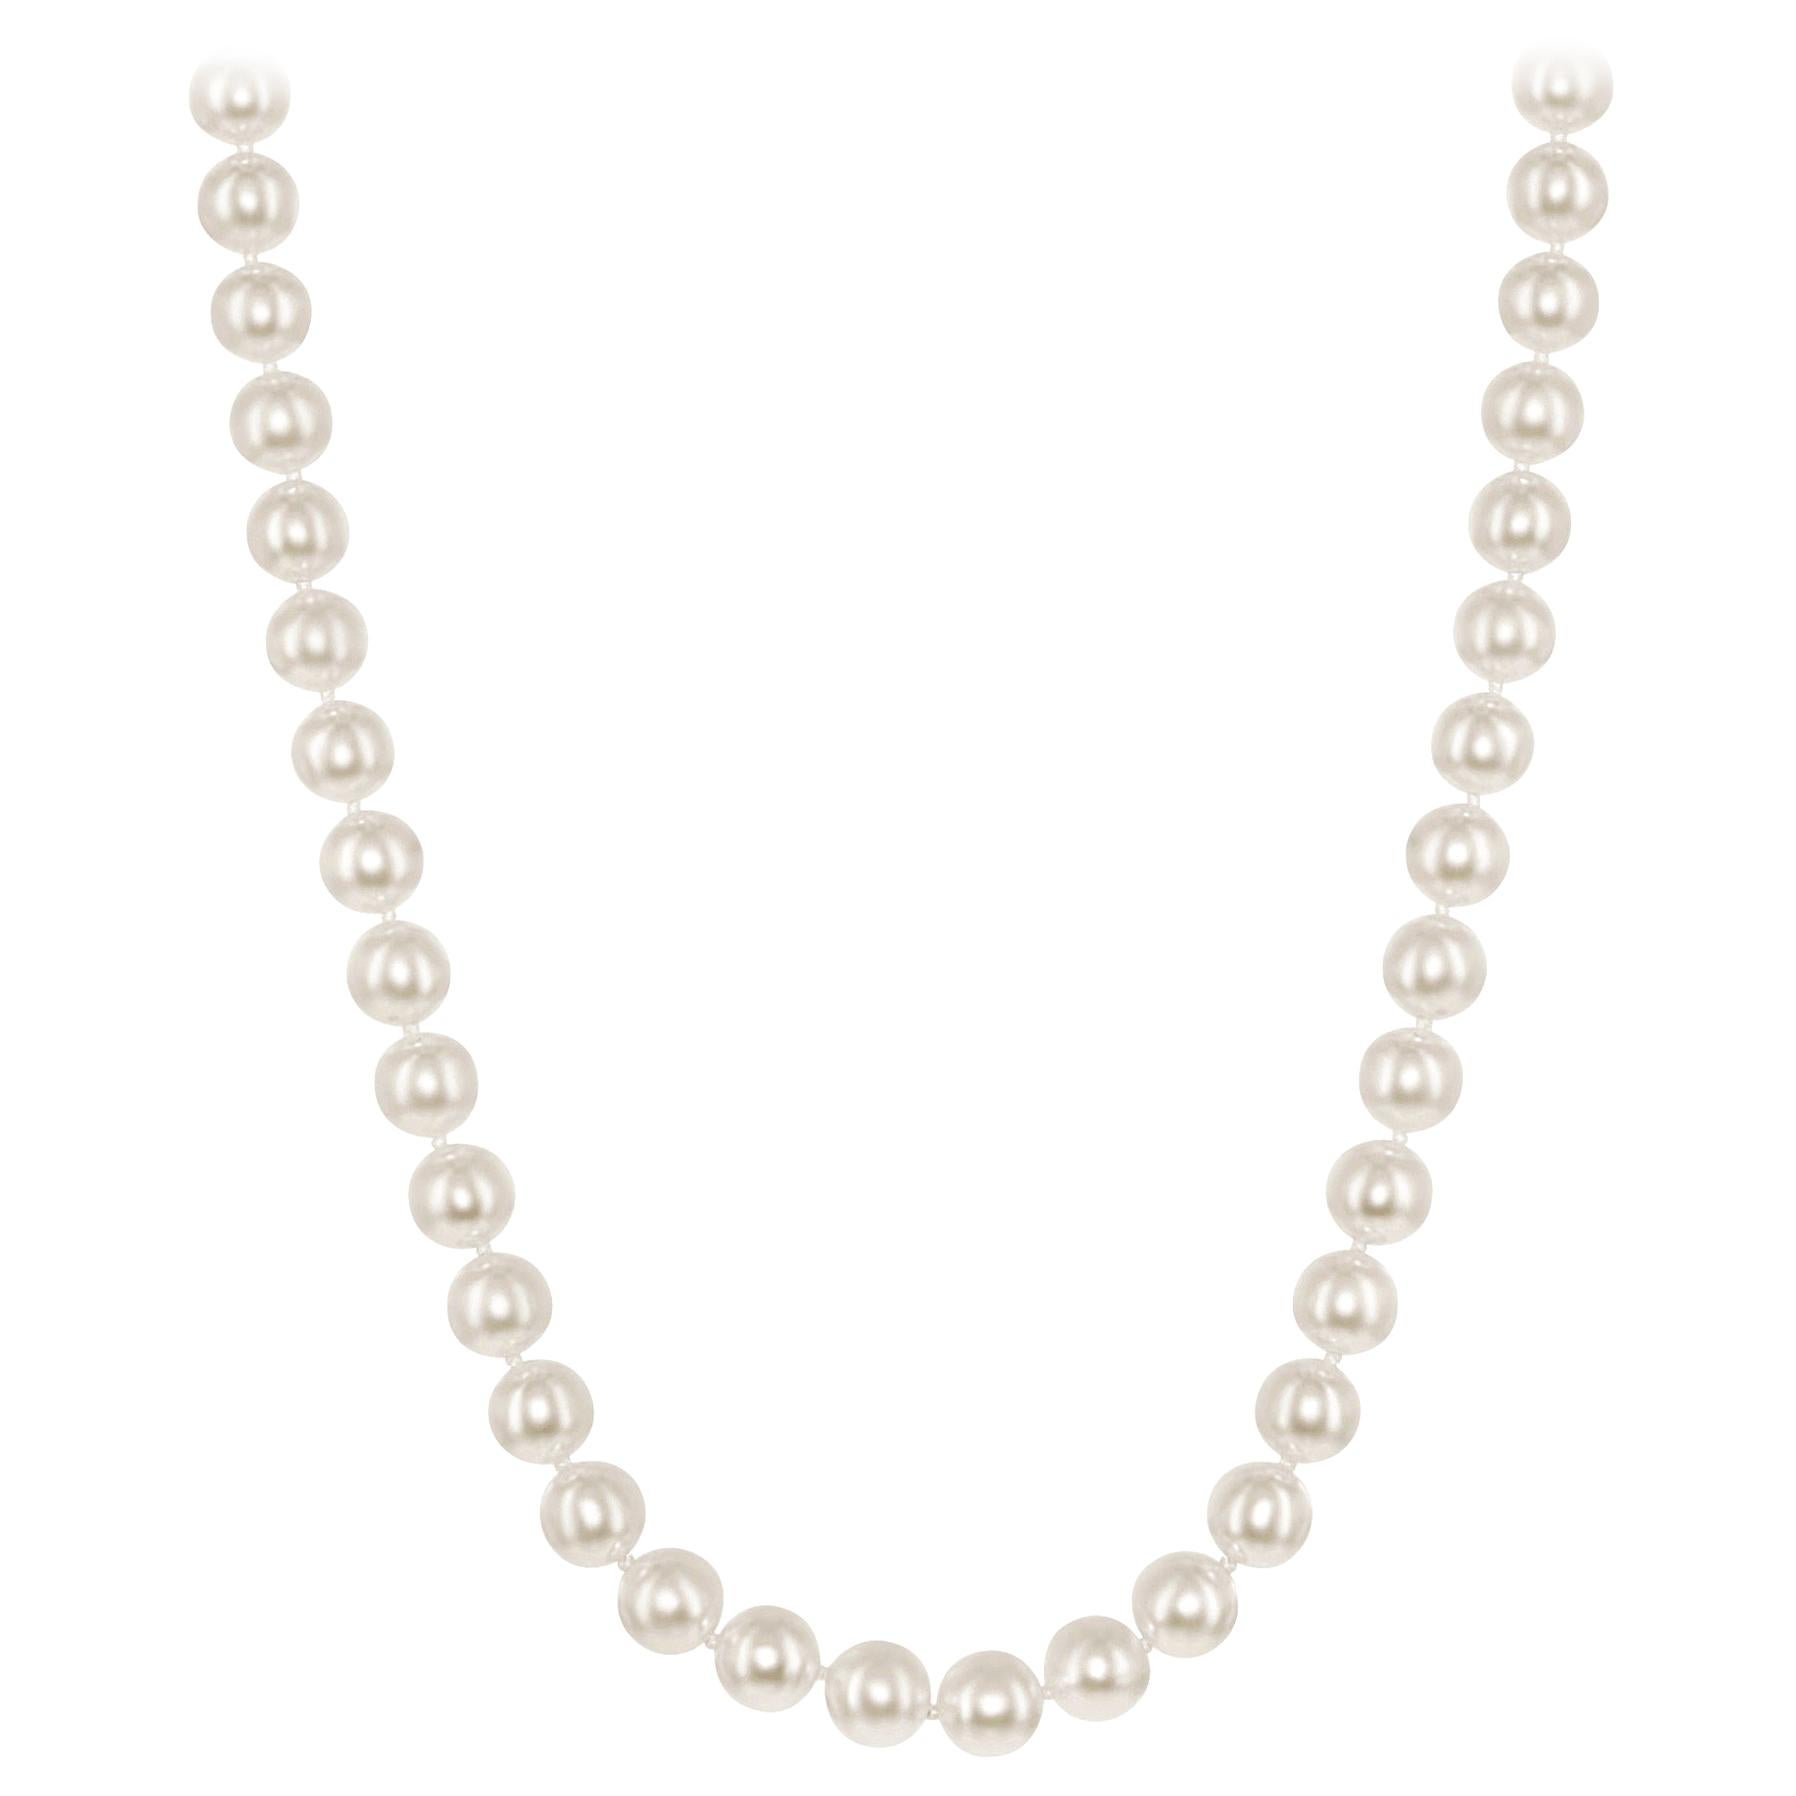 Japanese Akoya Cultured 7-7.5mm Pearl Necklace with 14K Gold Clasp For Sale